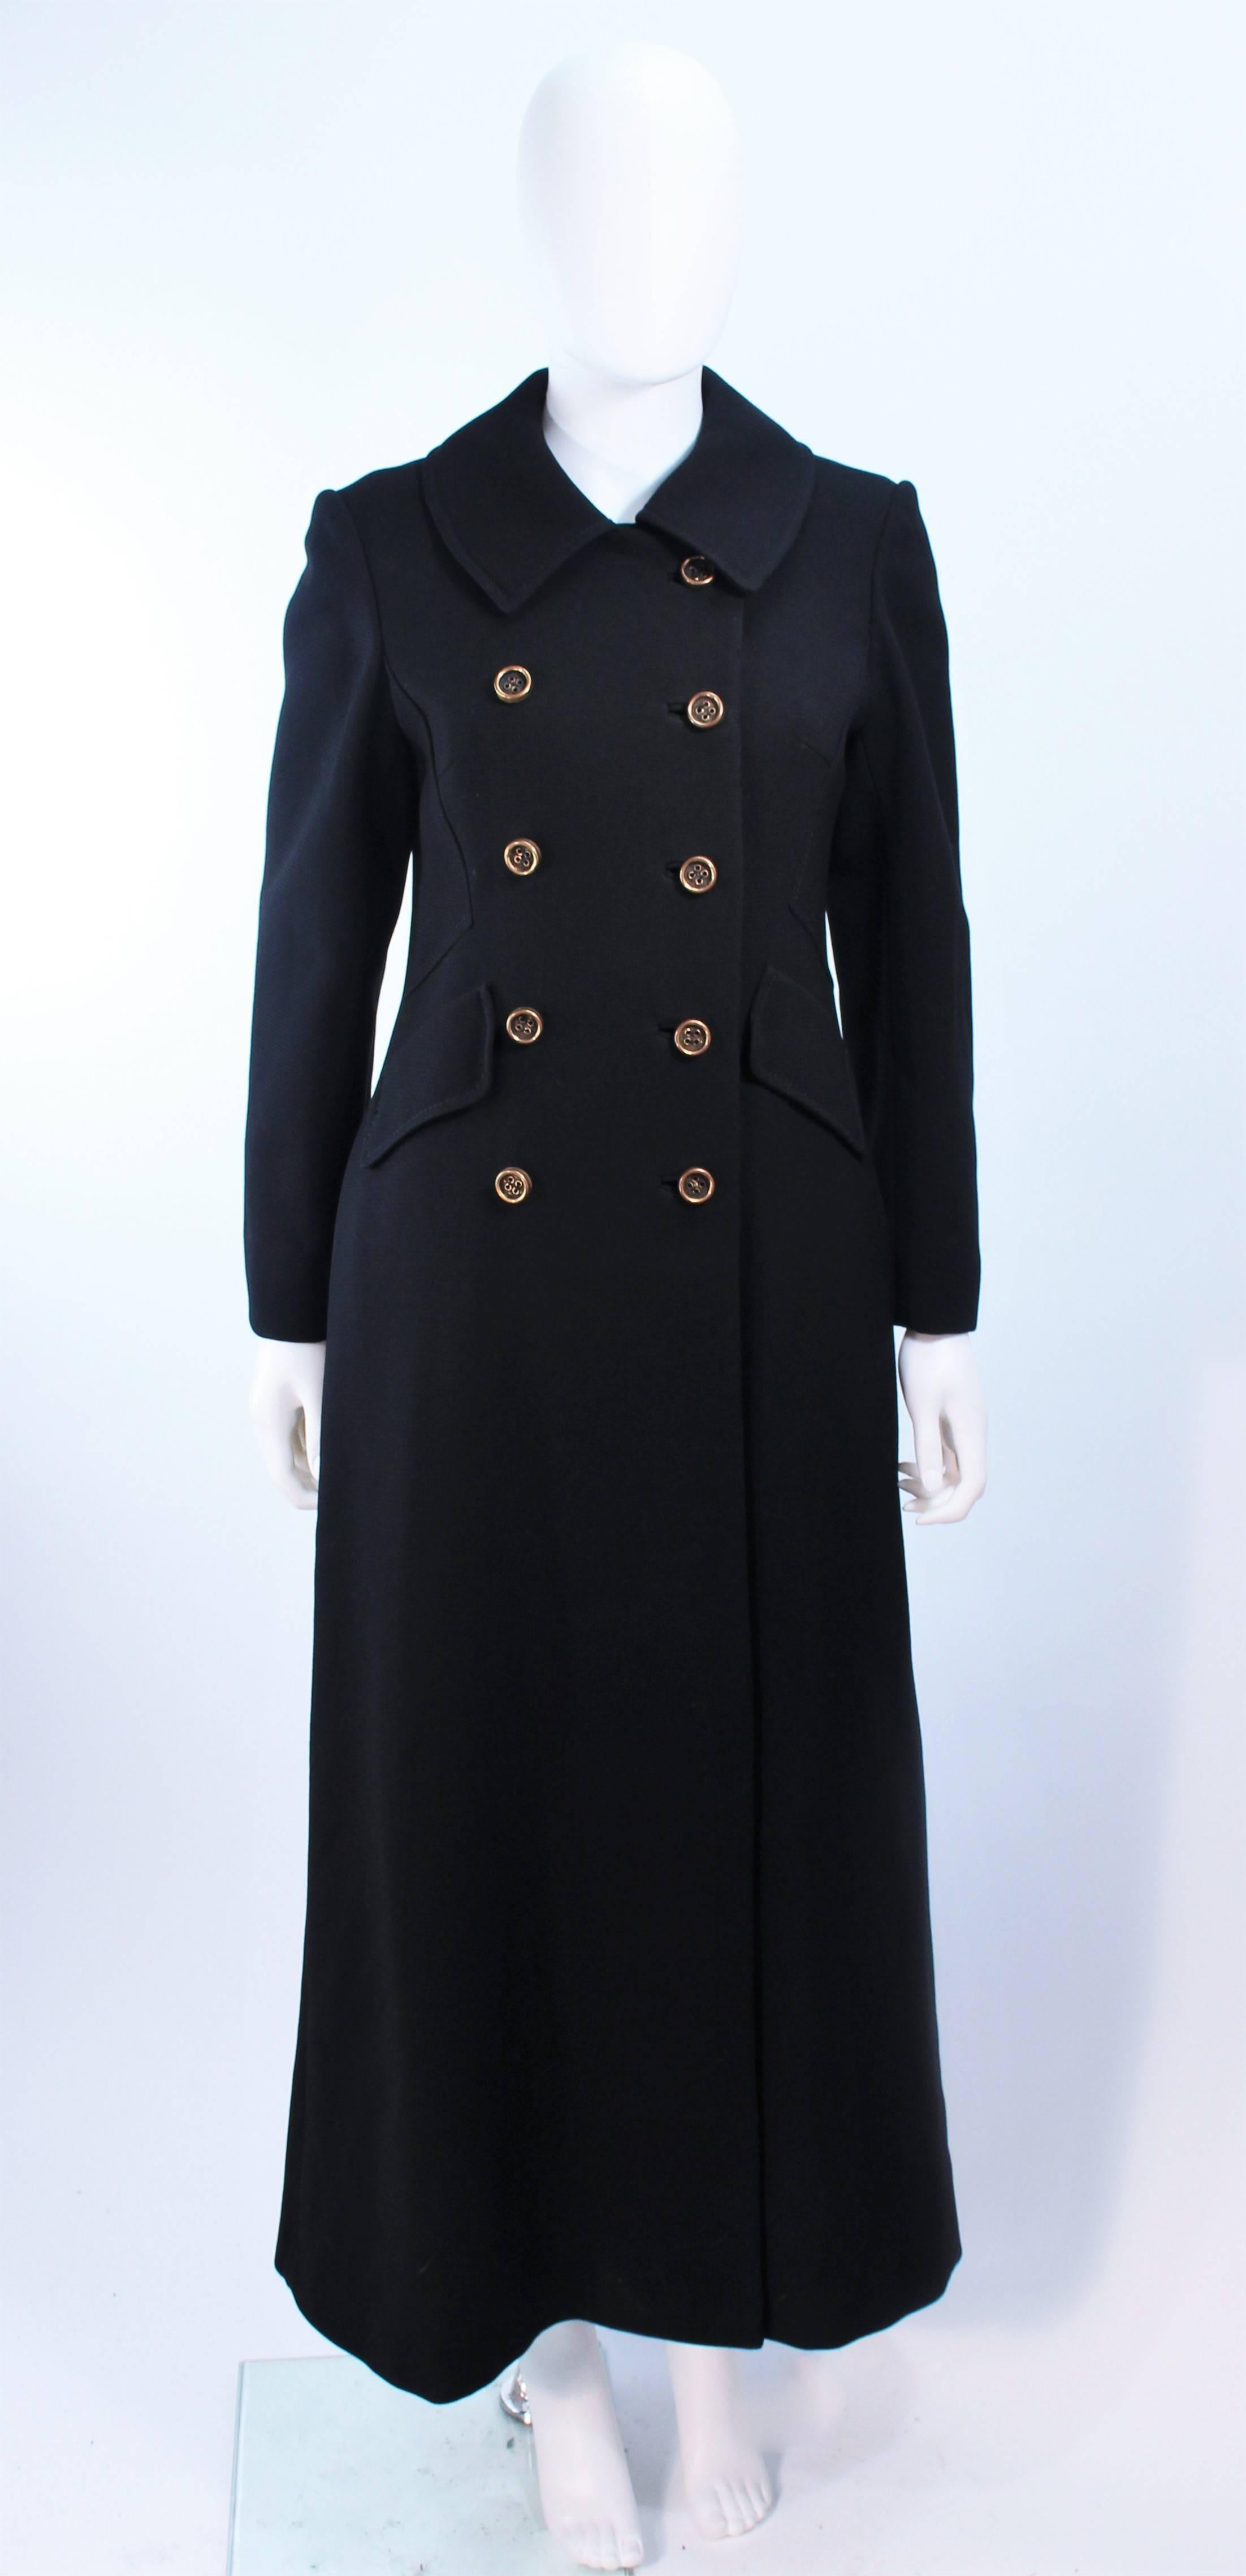 This Alton Lewis design is composed of a black wool. Features a double breasted style. In excellent vintage condition, there are a few repairable small moth holes, see photographs.

**Please cross-reference measurements for personal accuracy. Size